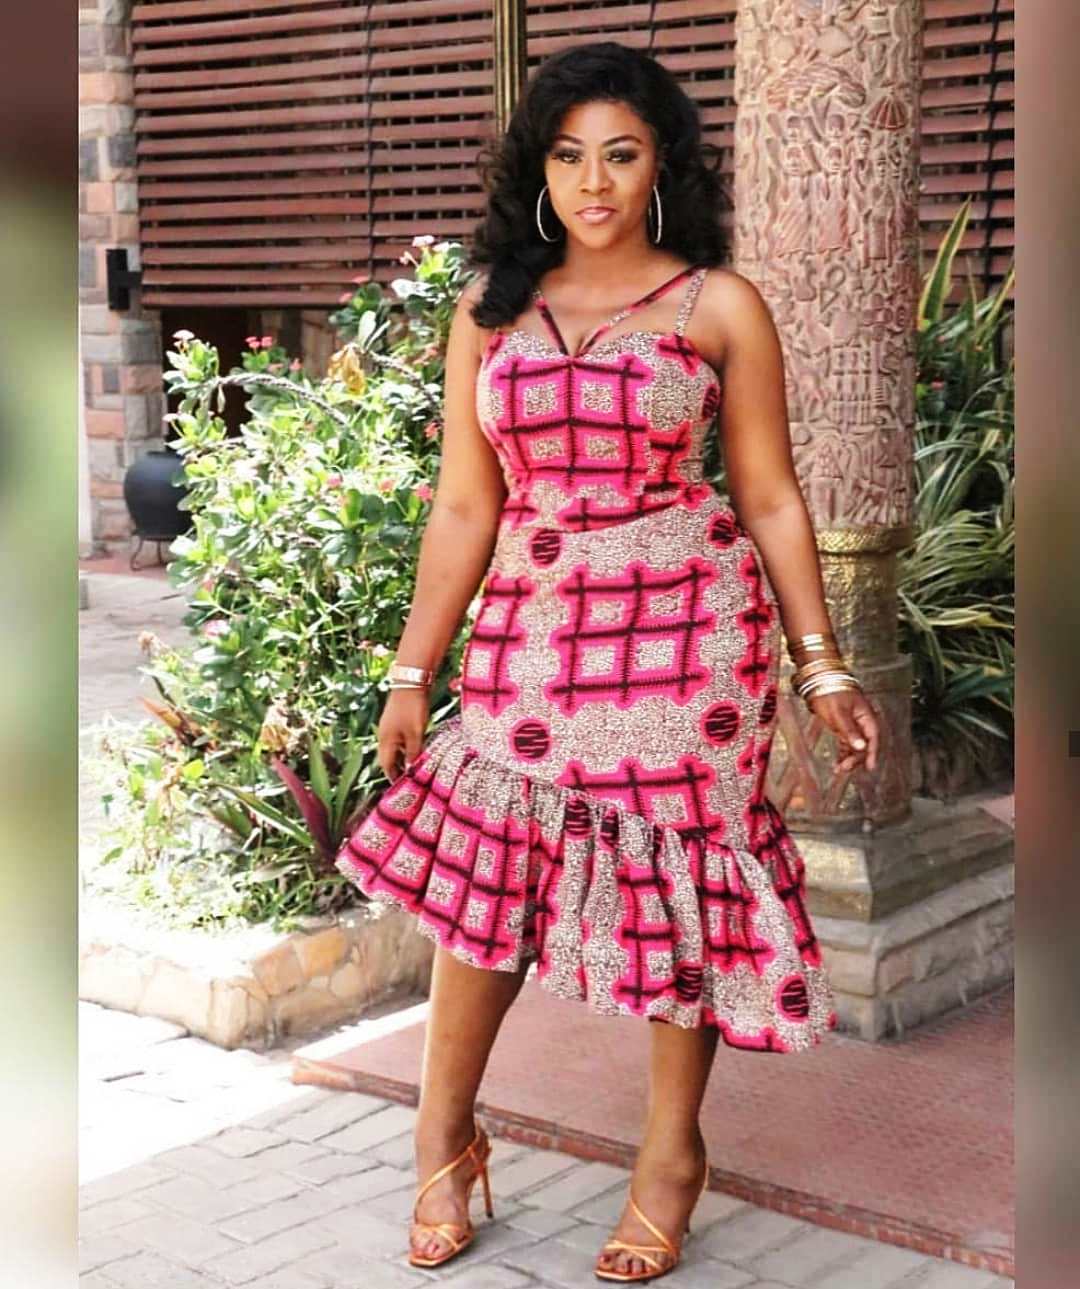 Latest Ankara Styles 2020 for Ladies: Best designs for ladies to trend